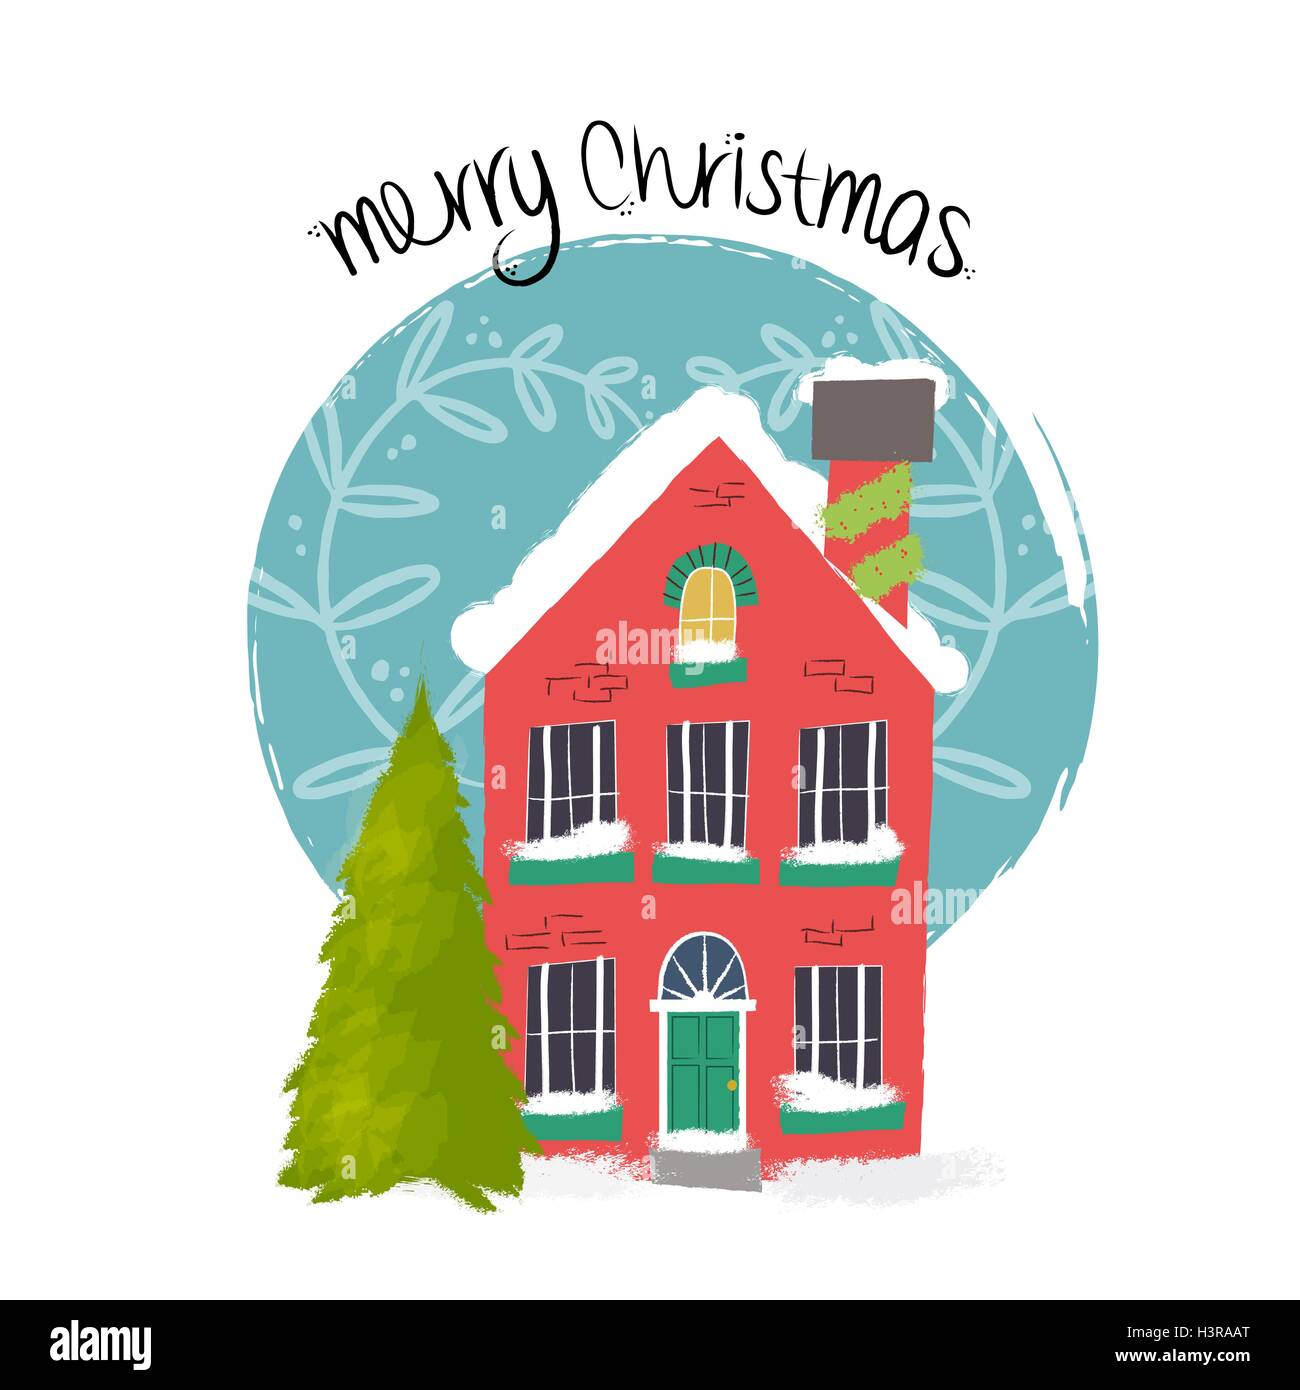 Hand drawn merry christmas illustration with colorful decorated house covered in snow. EPS10 vector. Stock Vector